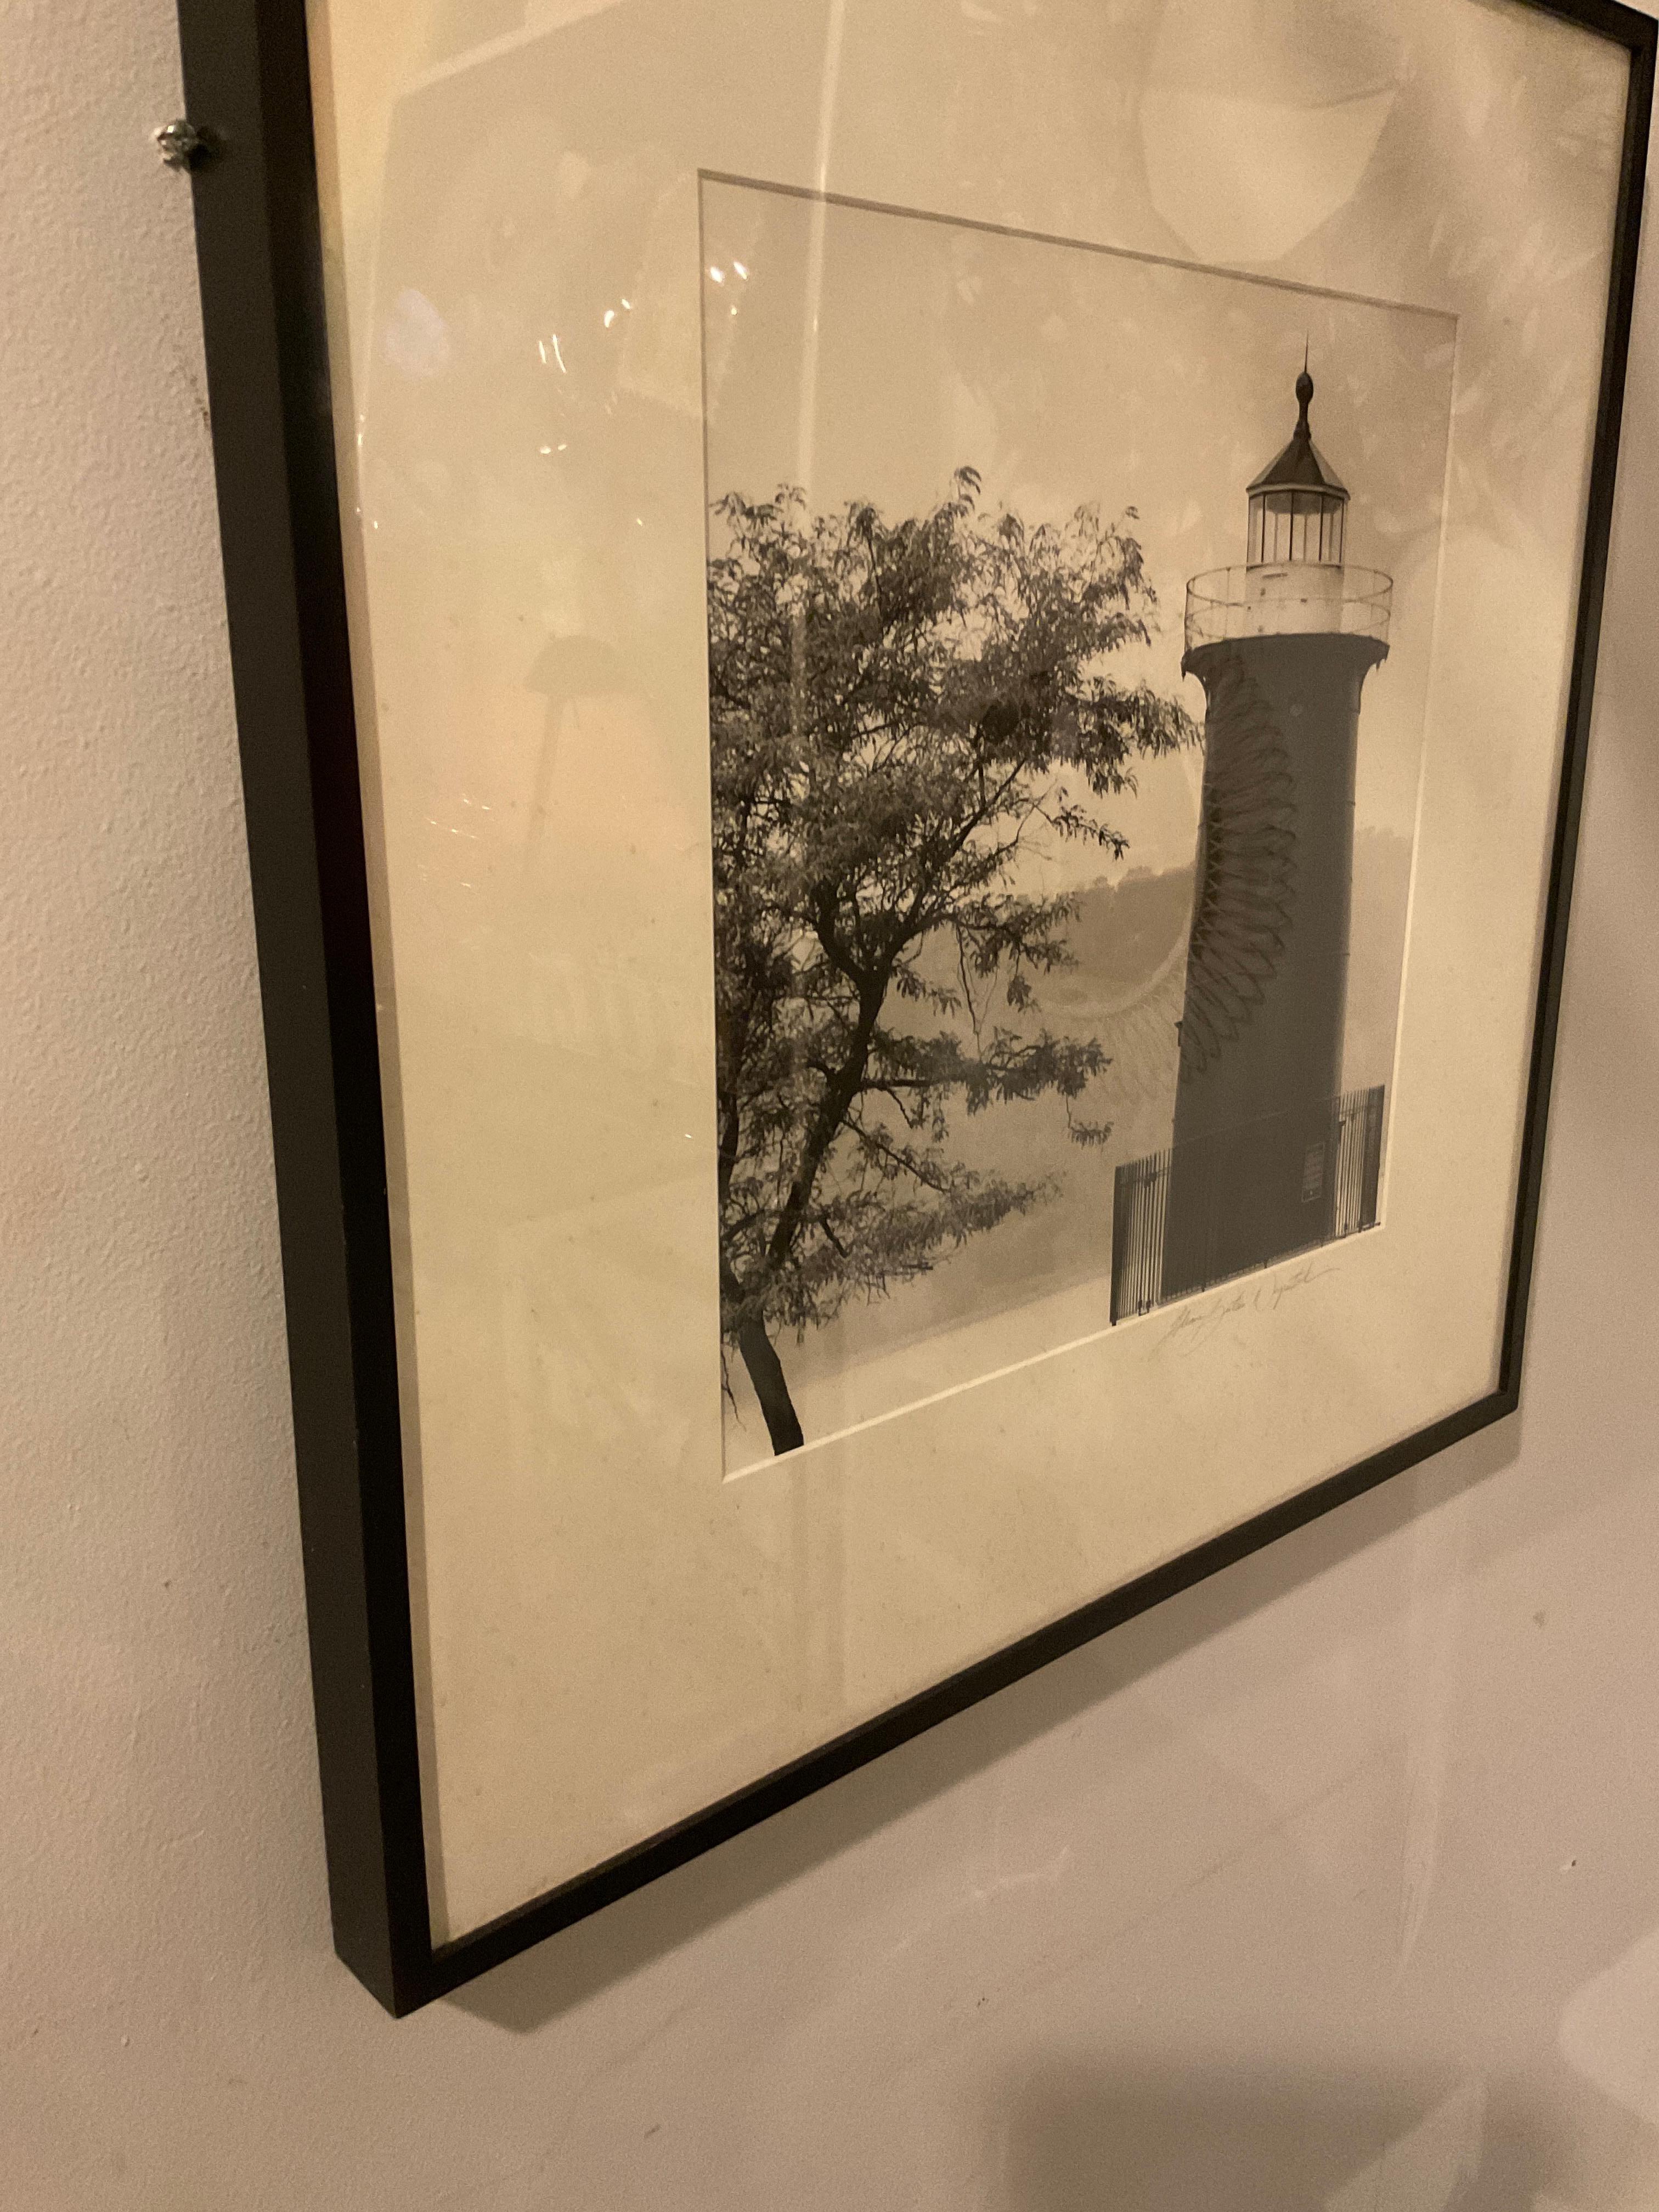 Paper Little Red Lighthouse Photograph By Ileane Bernstein Naprstek For Sale